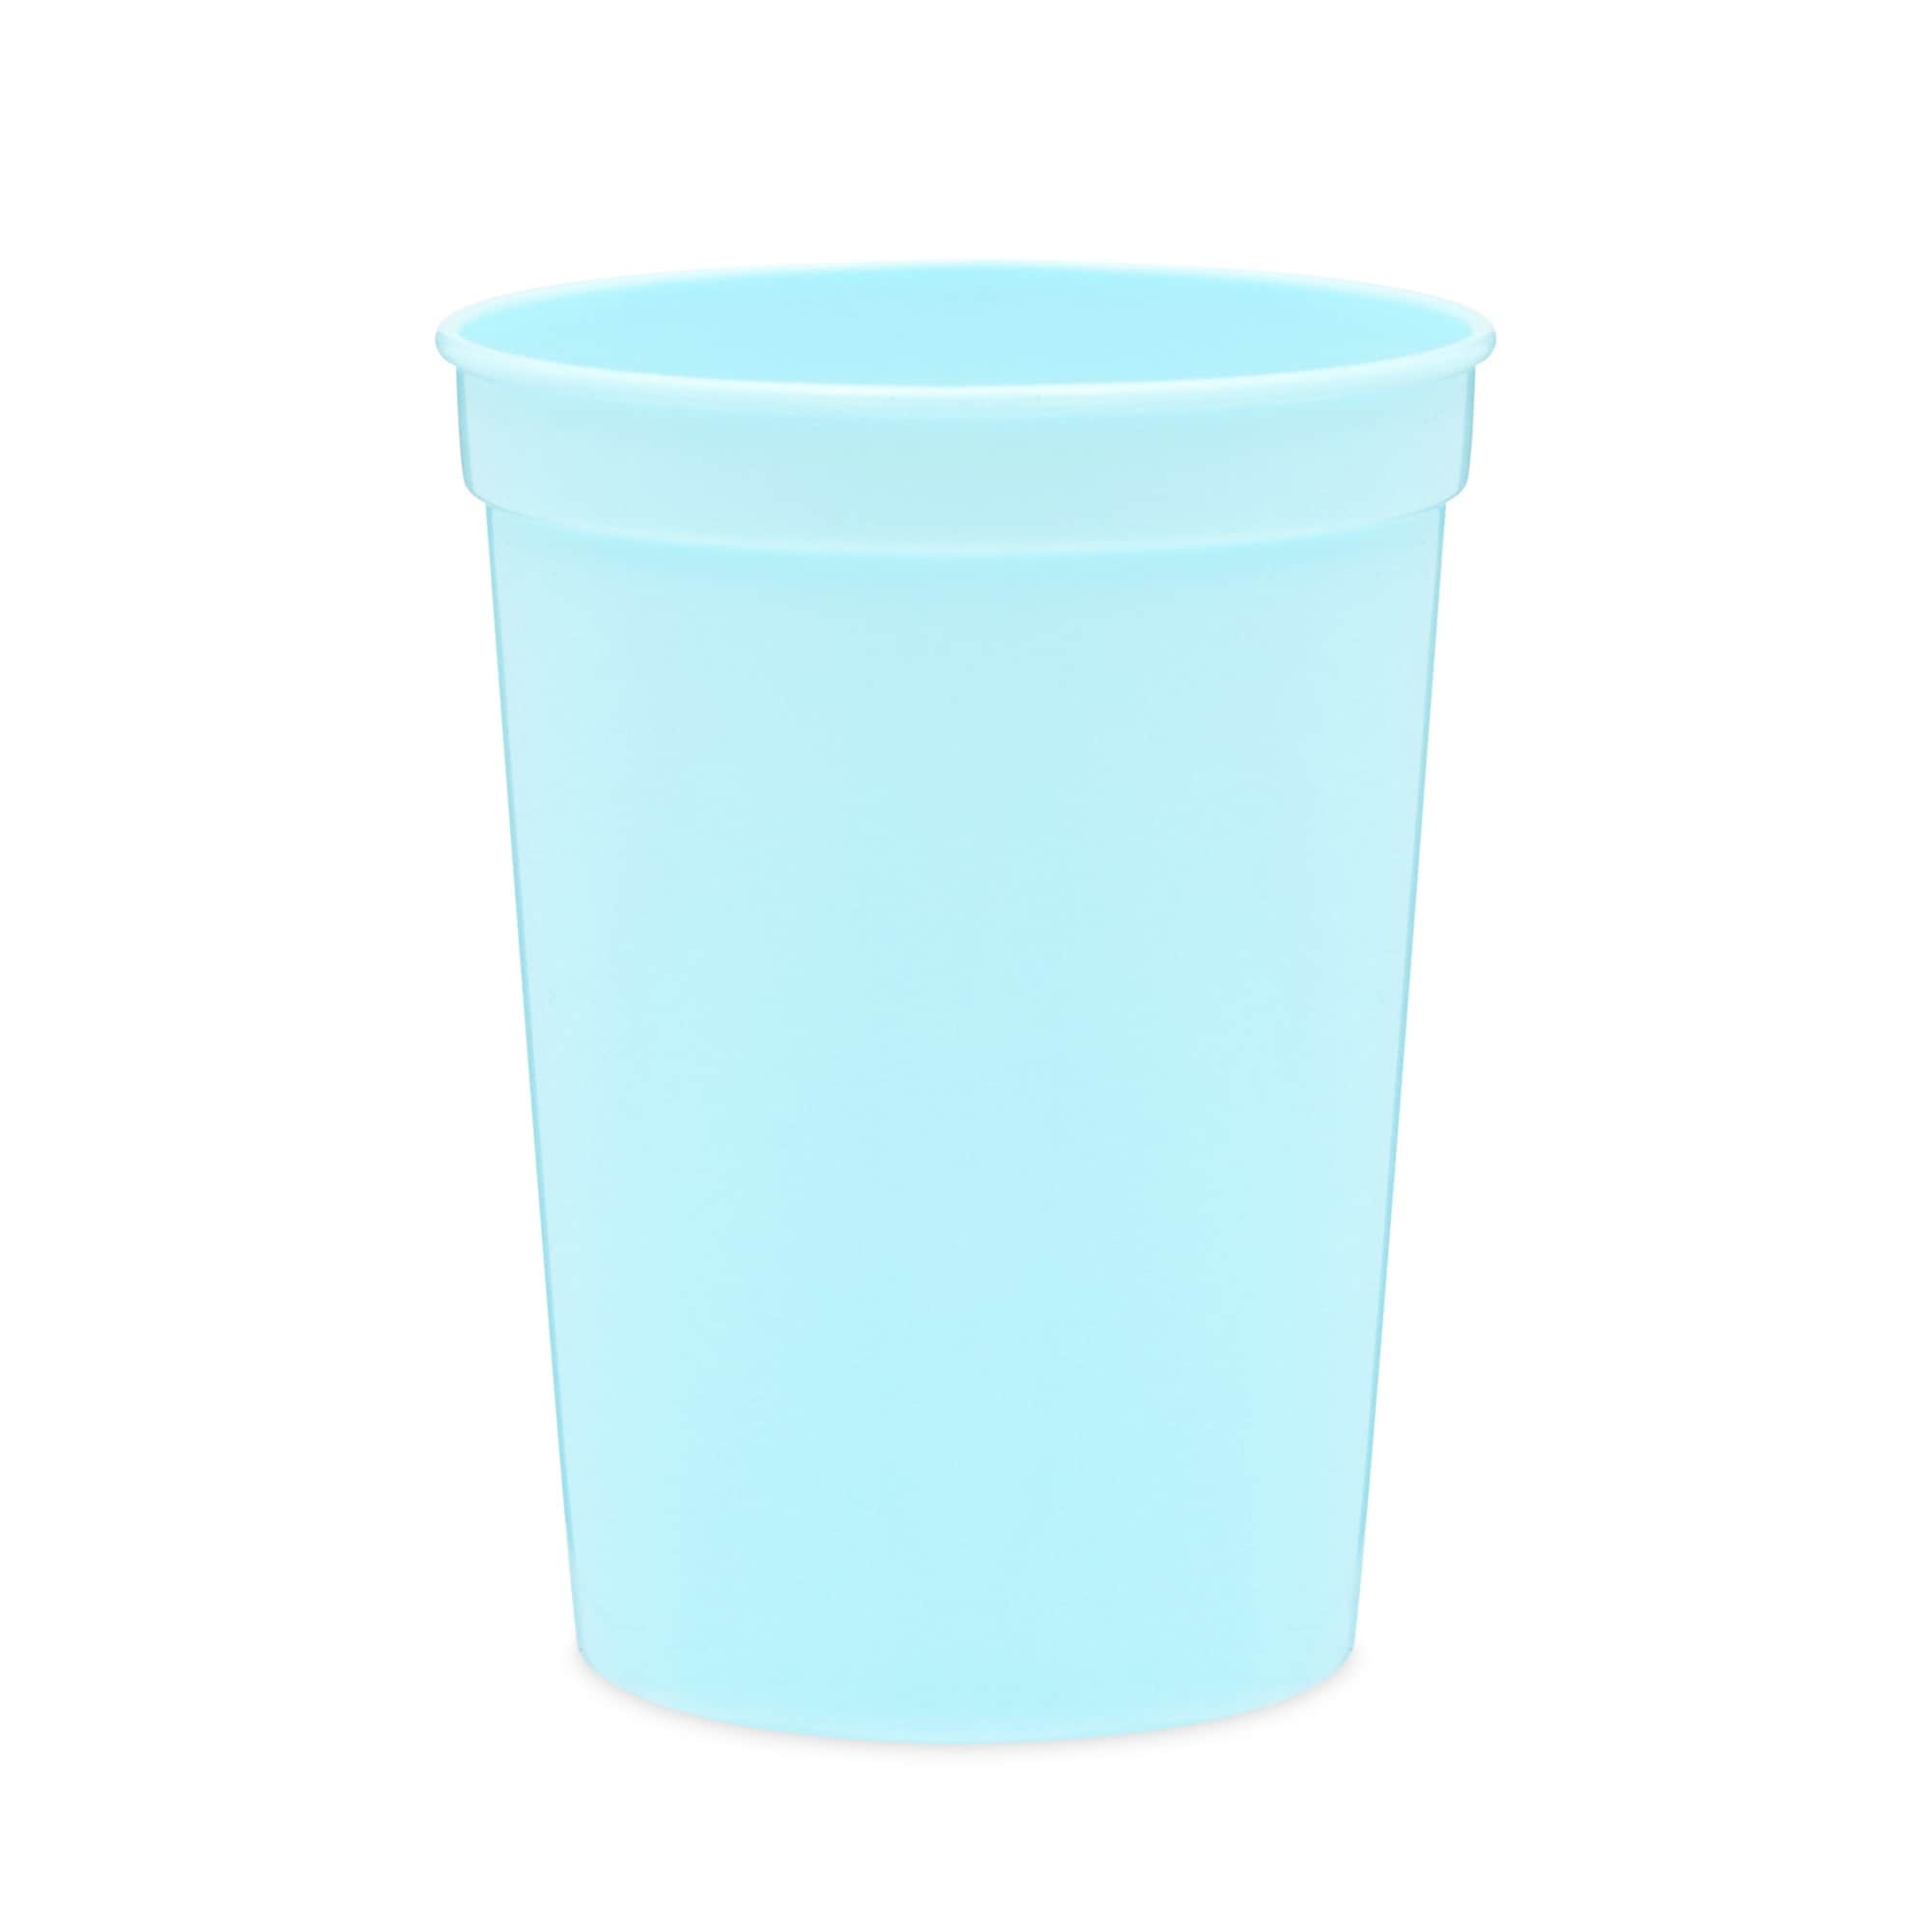 https://ak1.ostkcdn.com/images/products/is/images/direct/adf7ad9b983f19018e9510c1dd2ea41462d36a28/Light-Blue-Plastic-Stadium-Cups%2C-Bulk-Reusable-Tumblers-for-All-Occasions-and-Celebrations-%2816-oz%2C-24-Pack%29.jpg